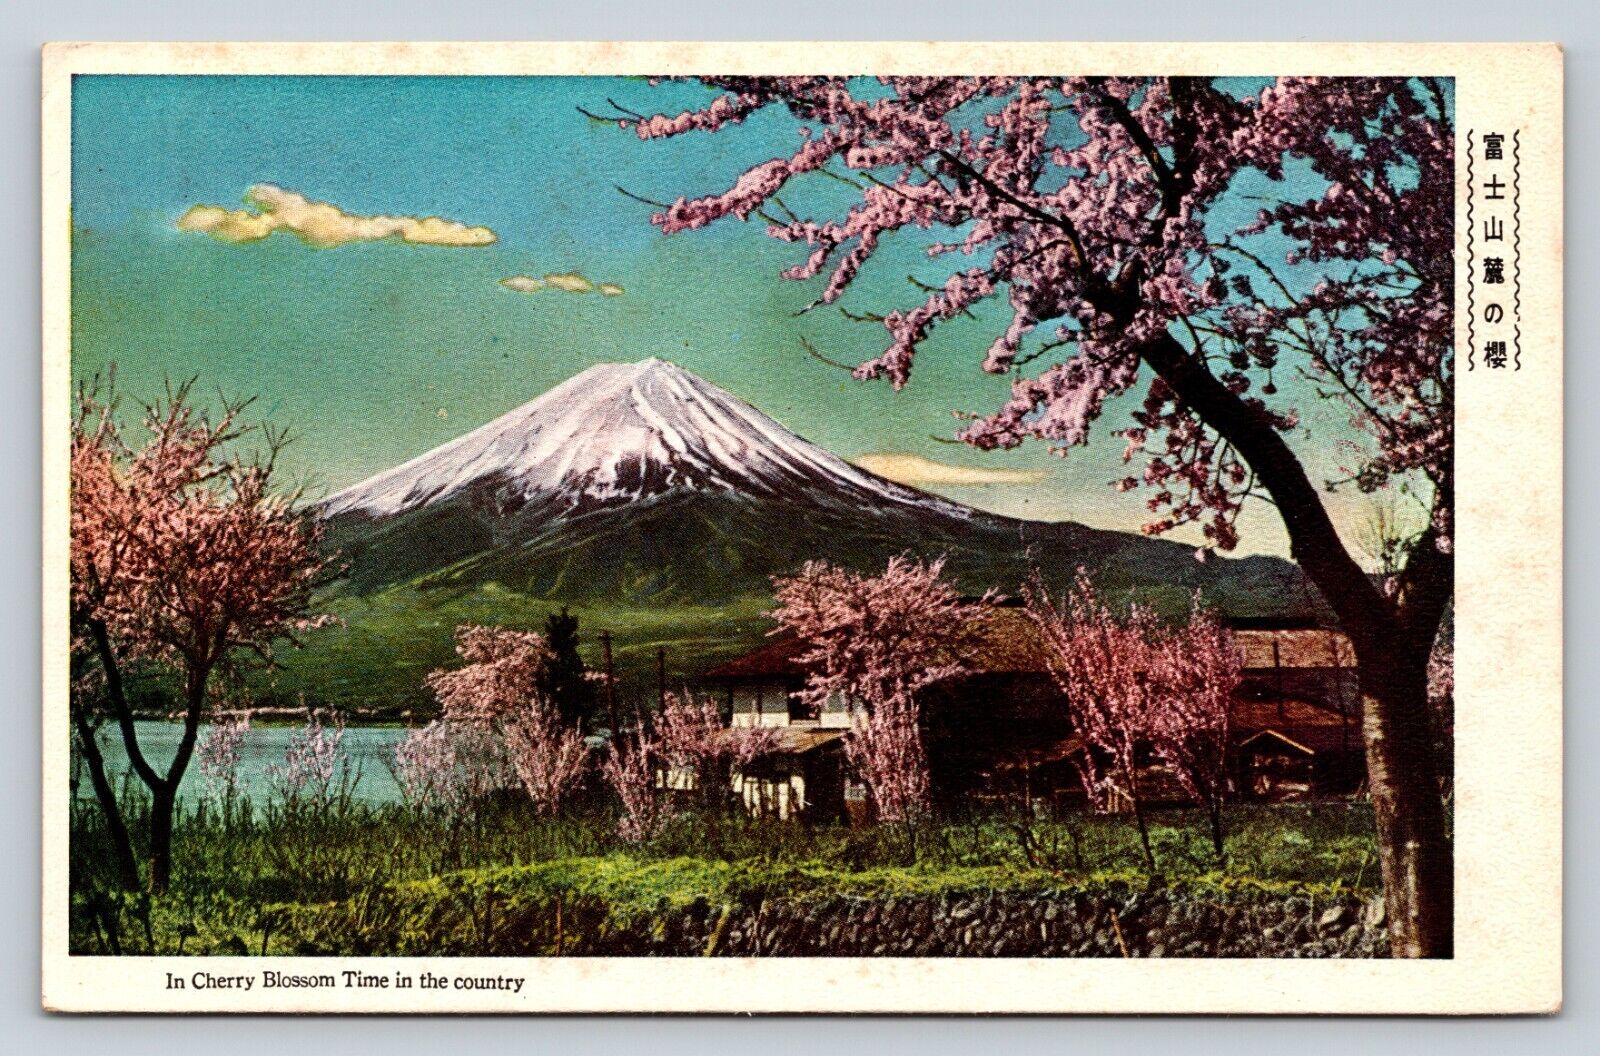 Mount Fuji Japan Cherry Blossom Time In The Country VINTAGE Postcard